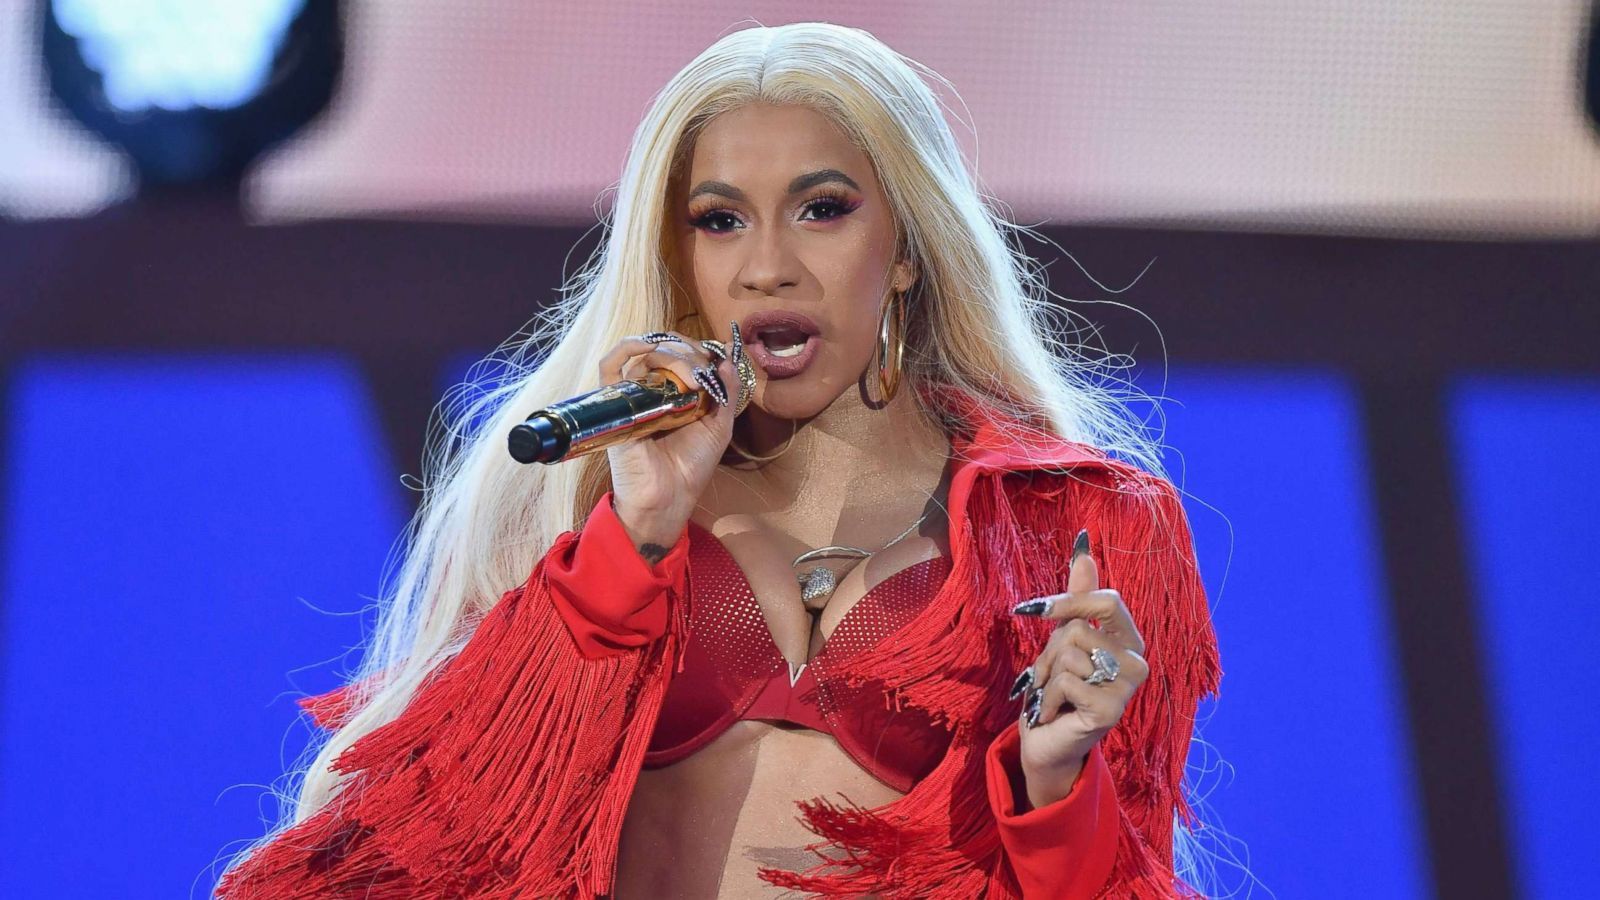 Cardi B facing 3 misdemeanor charges for role in fight at New York City strip club